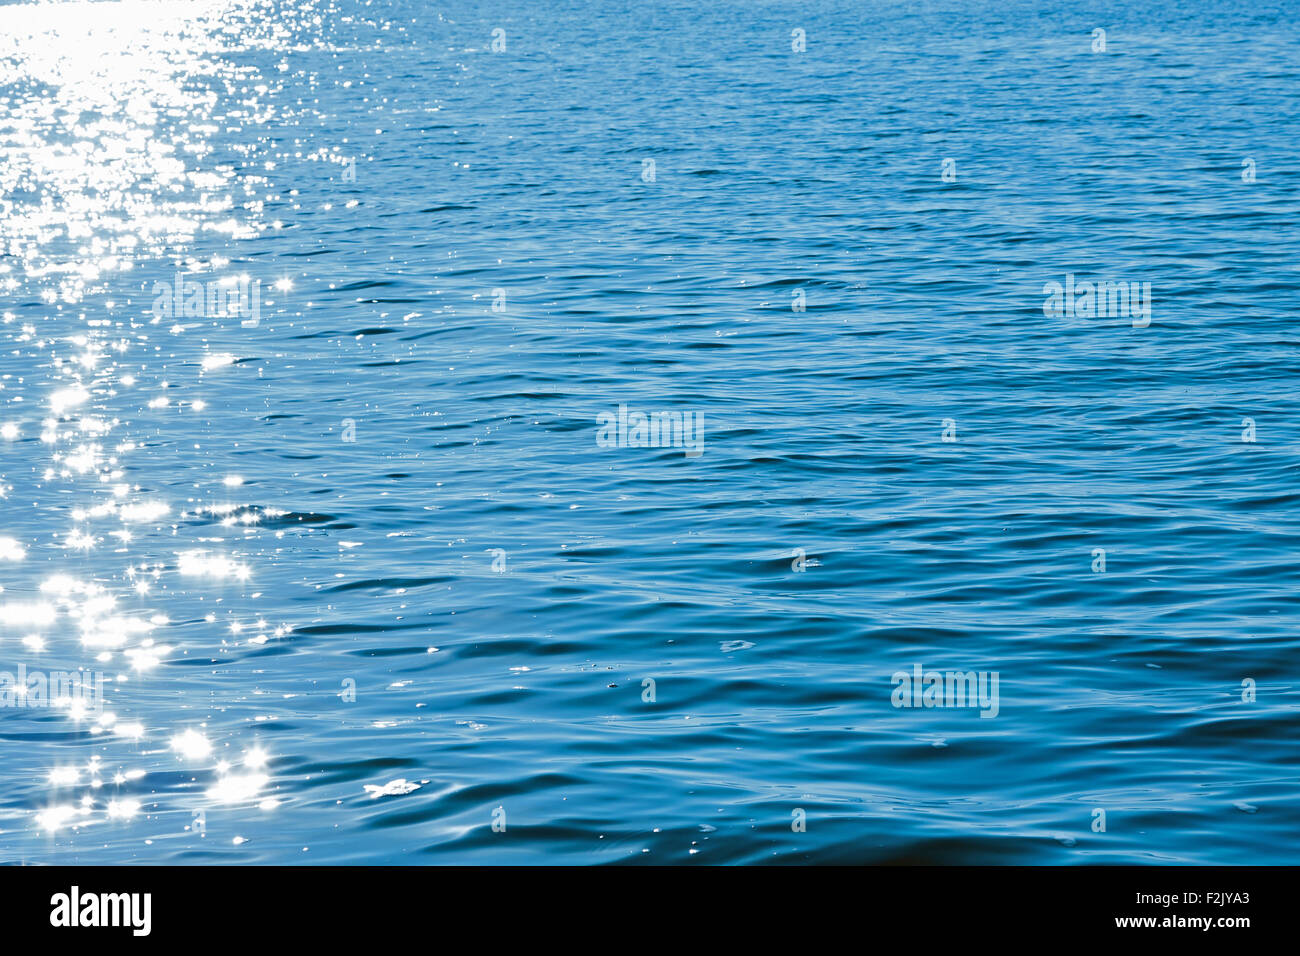 Sun reflexes in blue water as texture or background Stock Photo